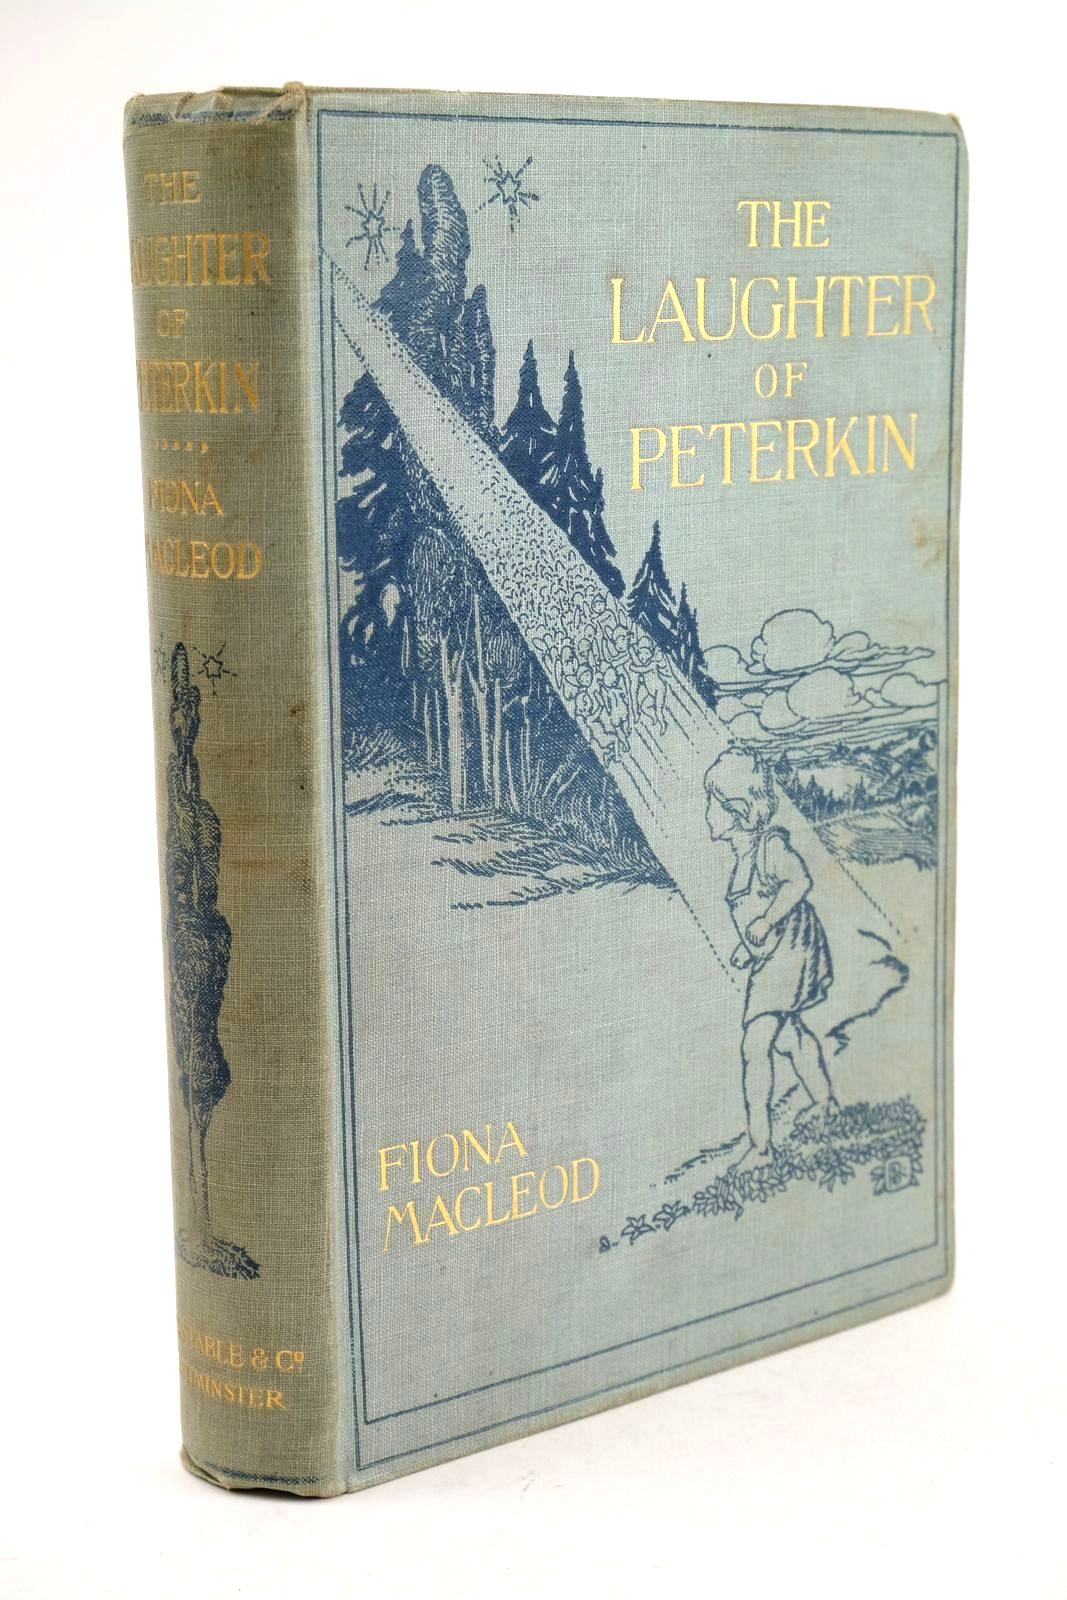 Photo of THE LAUGHTER OF PETERKIN written by Macleod, Fiona illustrated by Rollinson, Sunderland published by Archibald Constable And Co. (STOCK CODE: 1324238)  for sale by Stella & Rose's Books